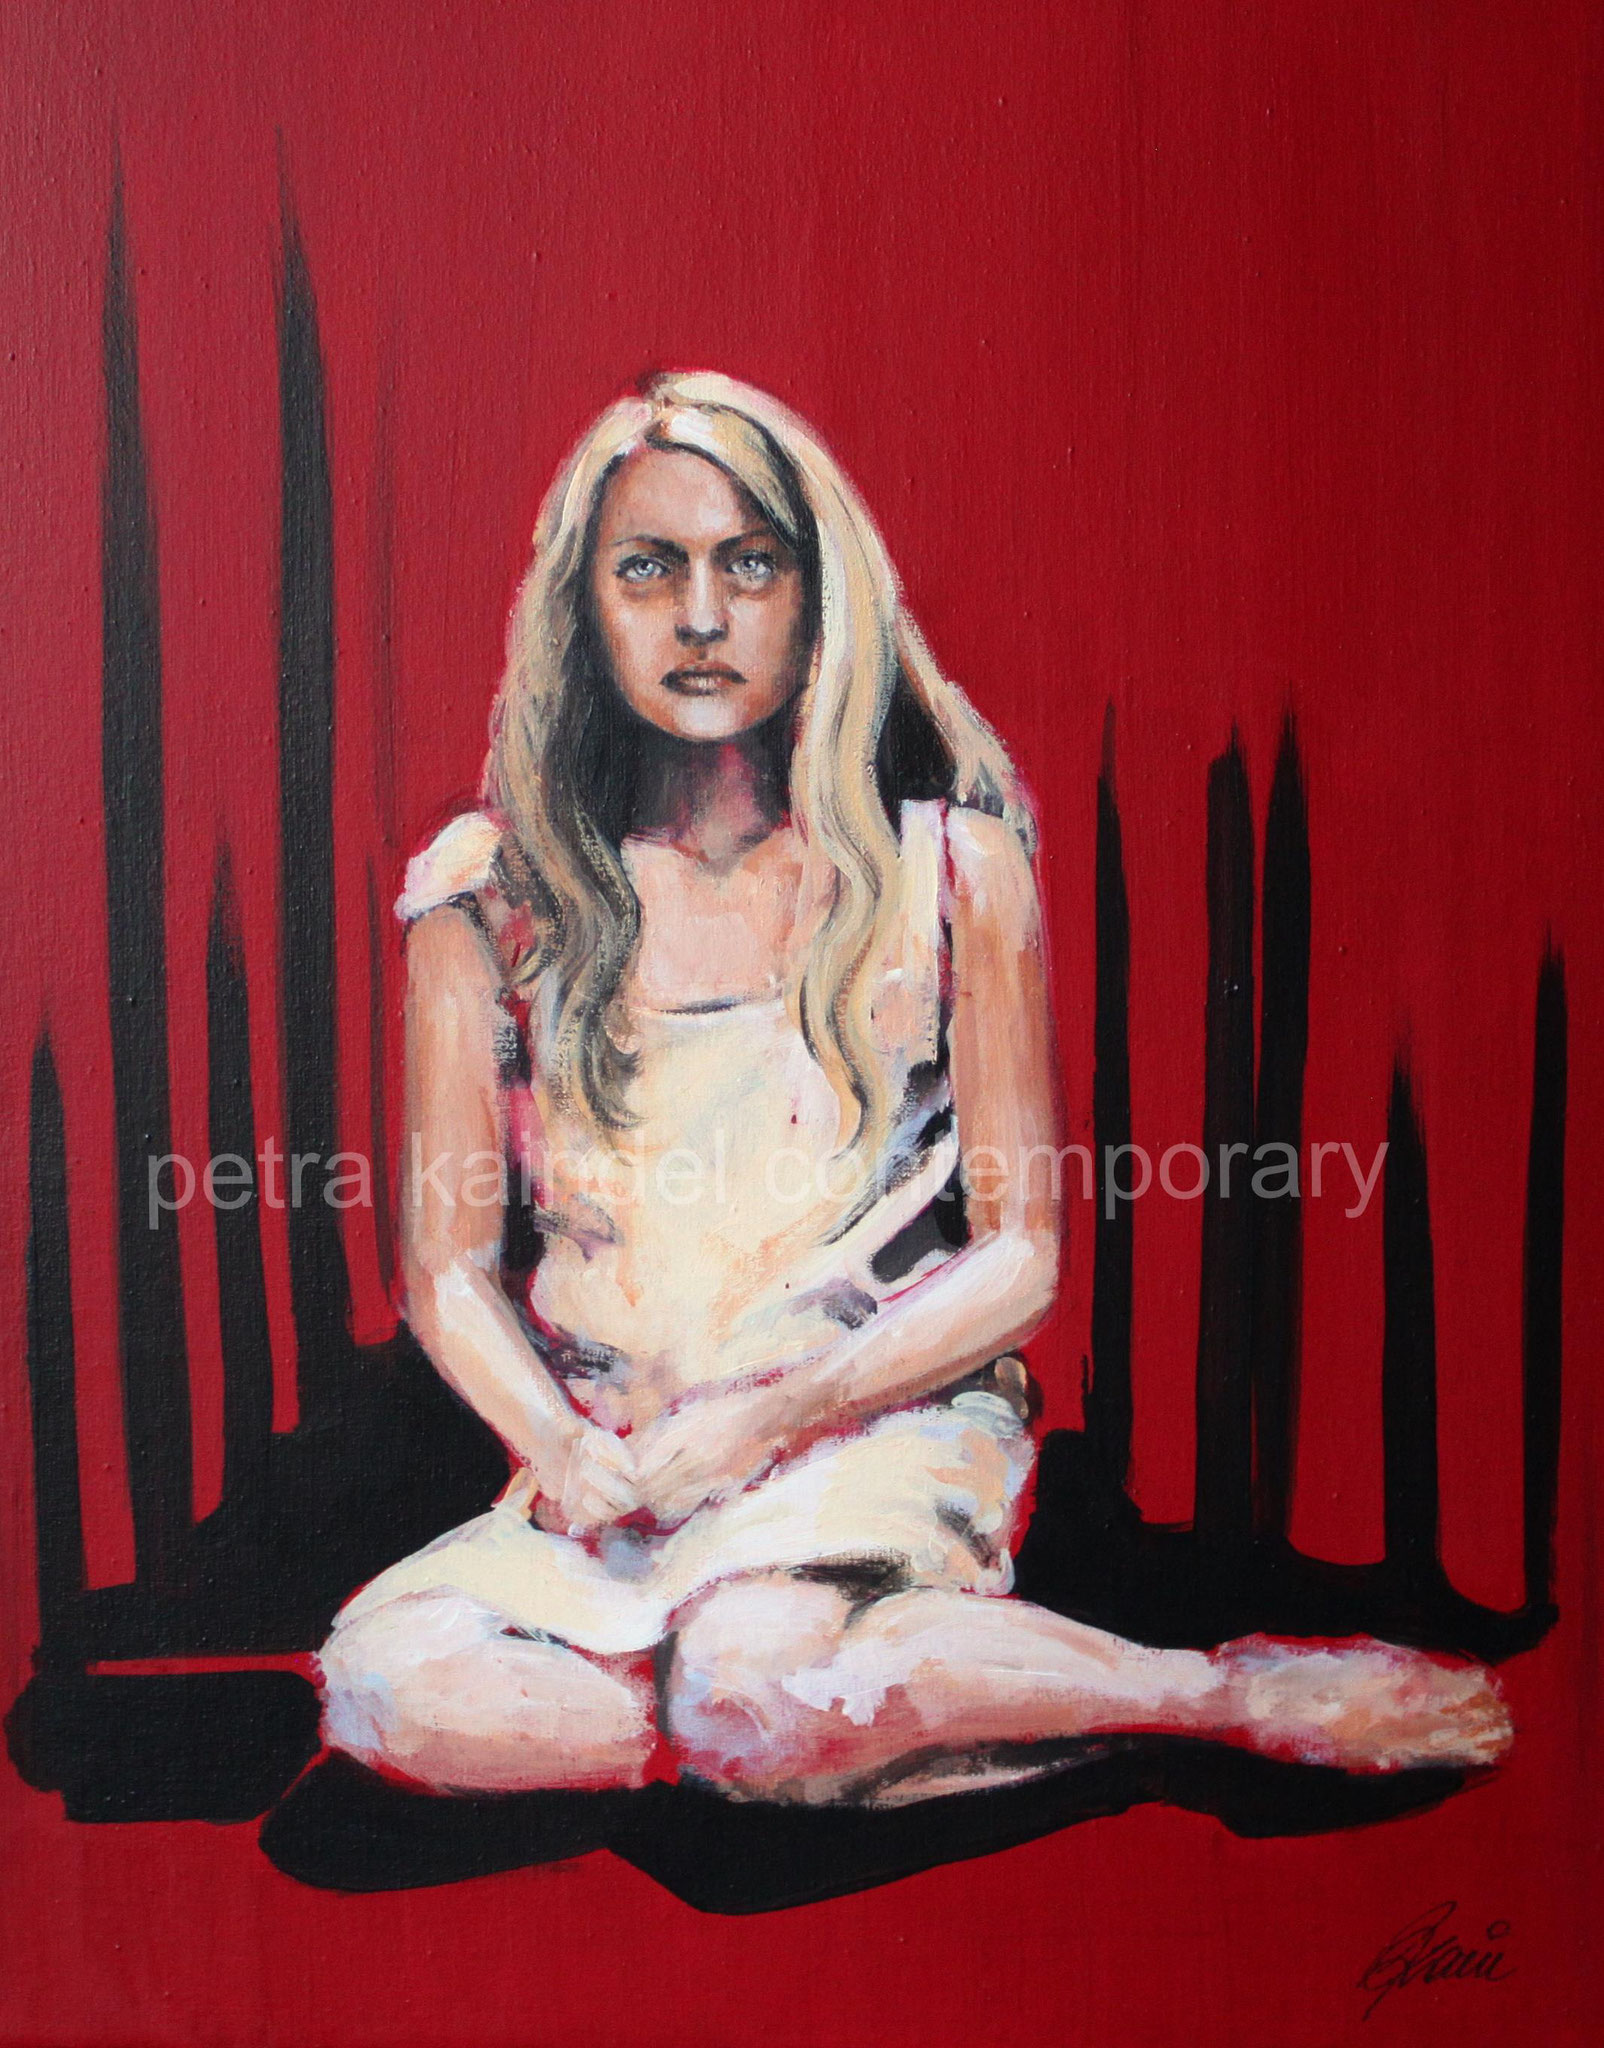 "I will not be that girl in the box" 606 x 500 mm, Acrylic on canvas, Inspired by "The handmaid's tale"